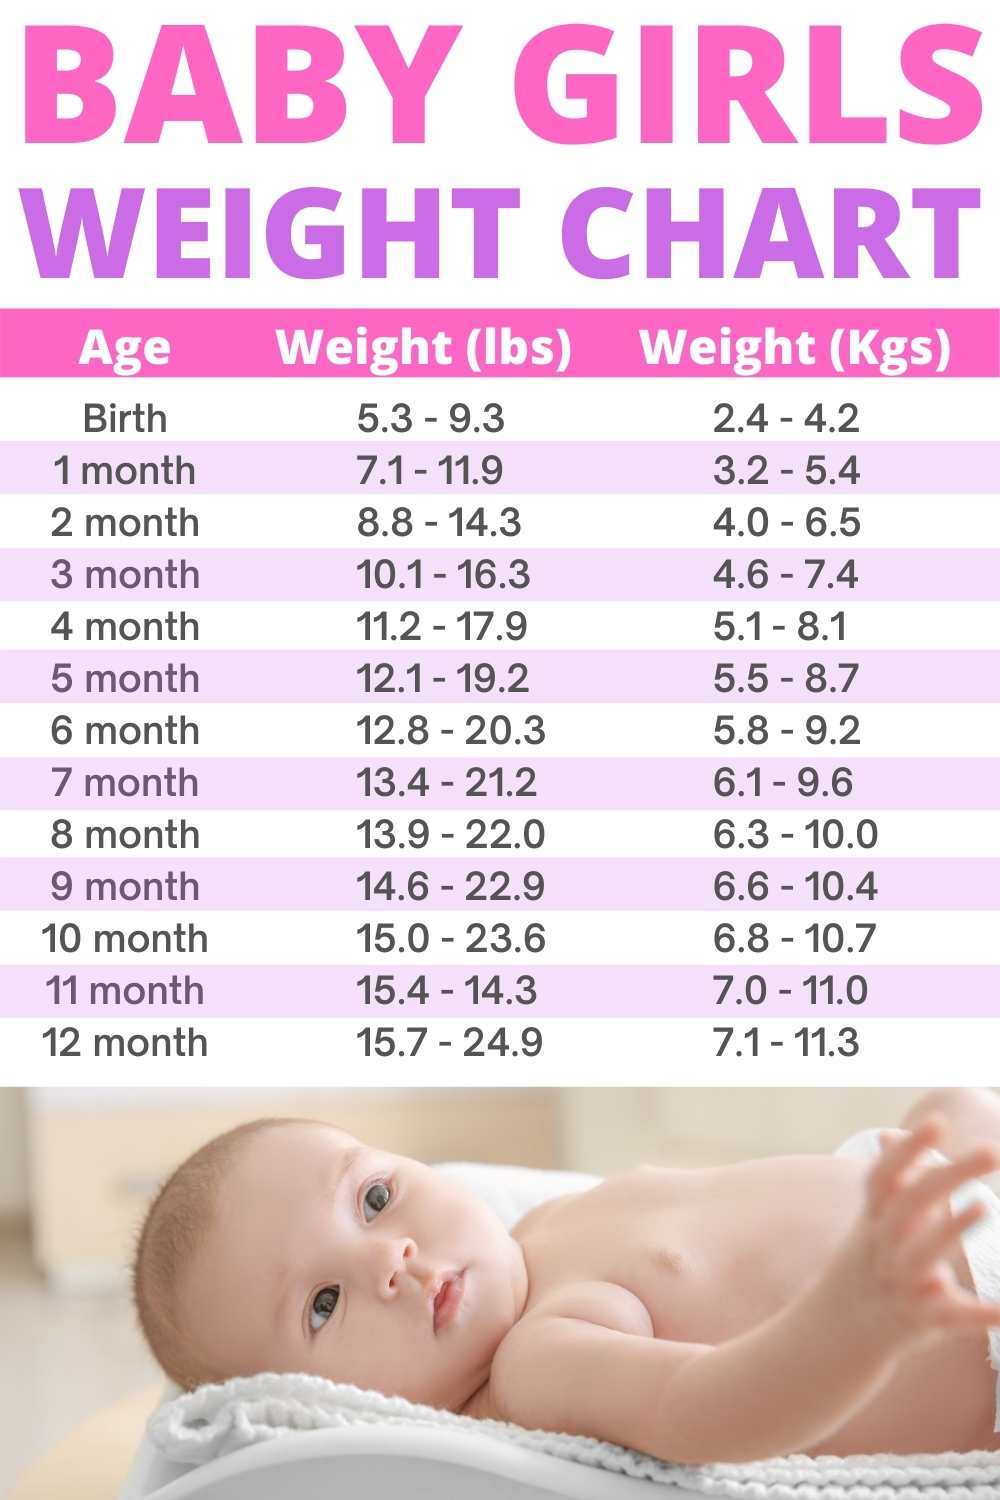 34 Weeks Baby Weight In Kg Chart